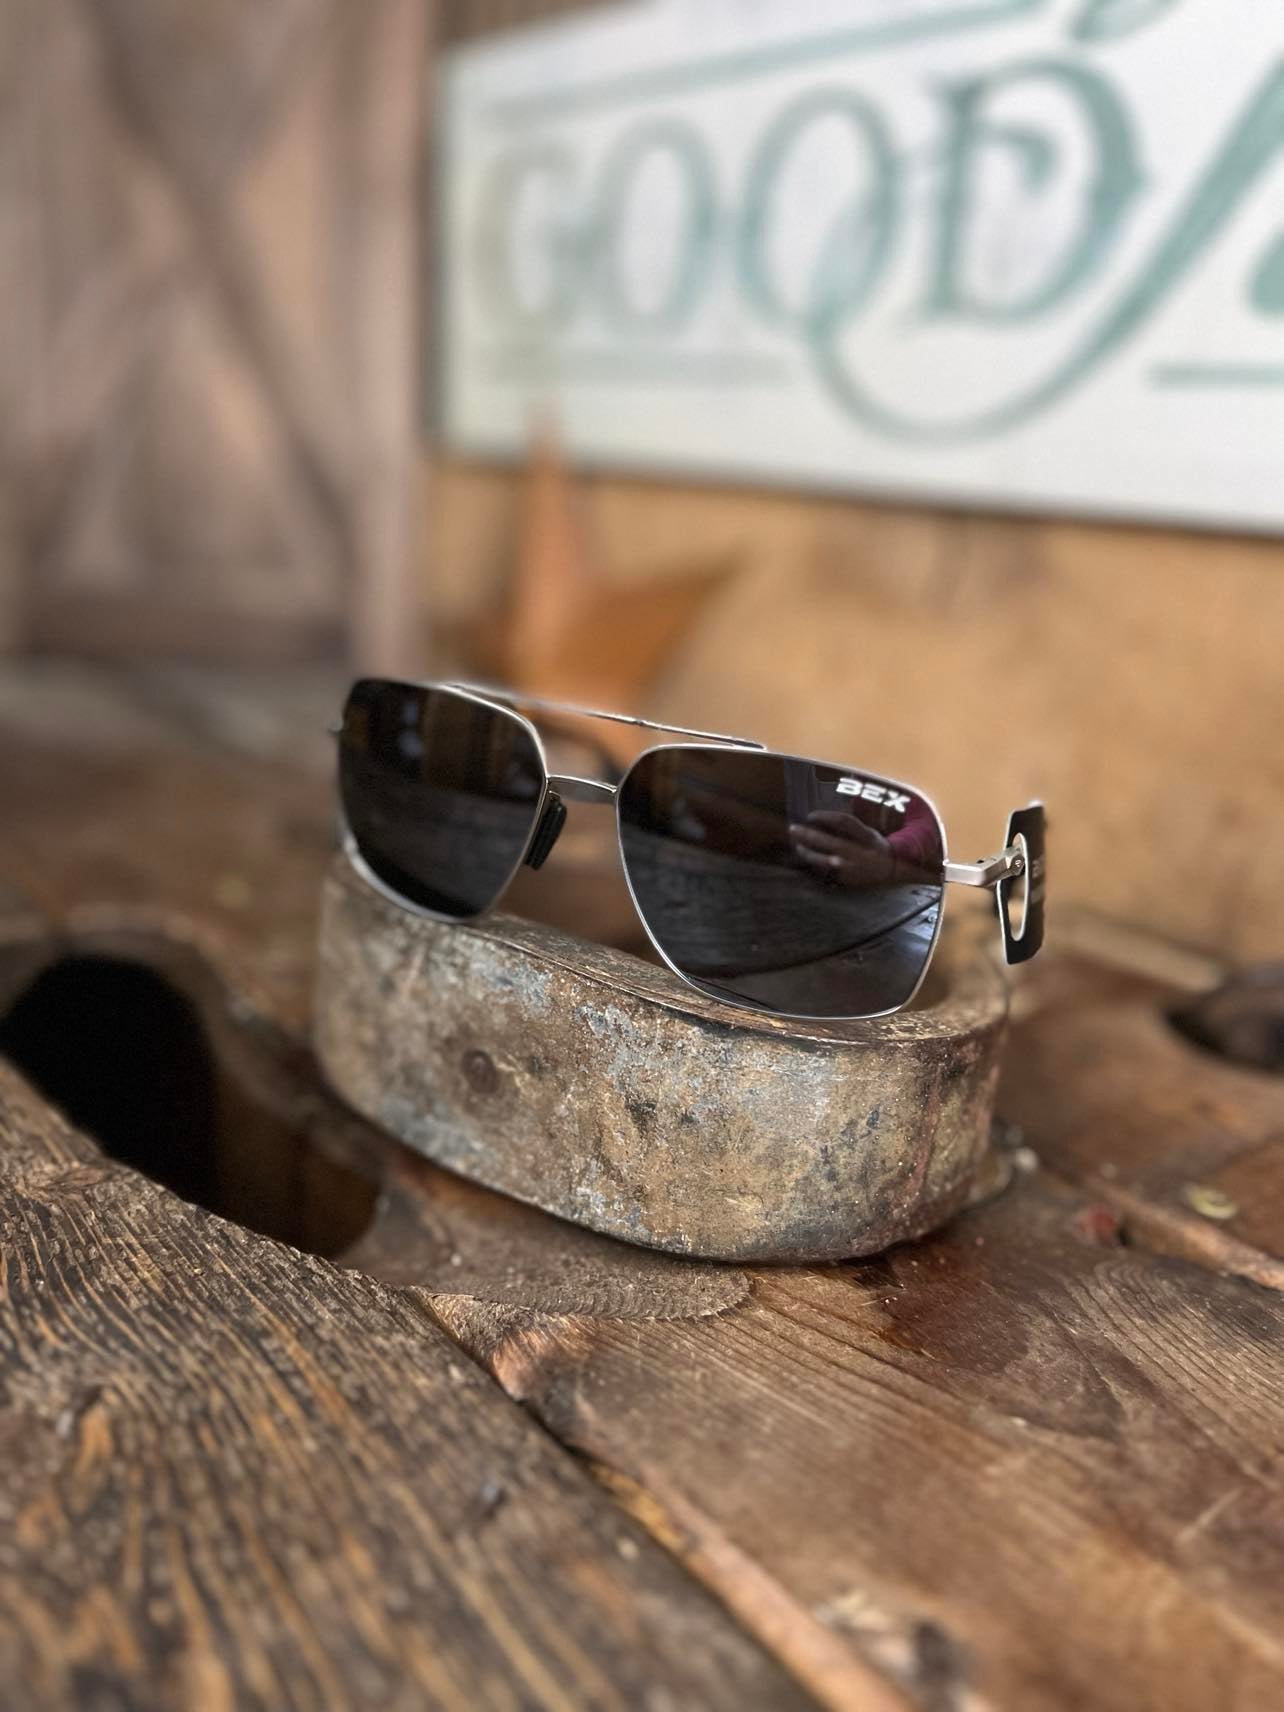 Bex Wing-Sunglasses-Bex Sunglasses-Lucky J Boots & More, Women's, Men's, & Kids Western Store Located in Carthage, MO